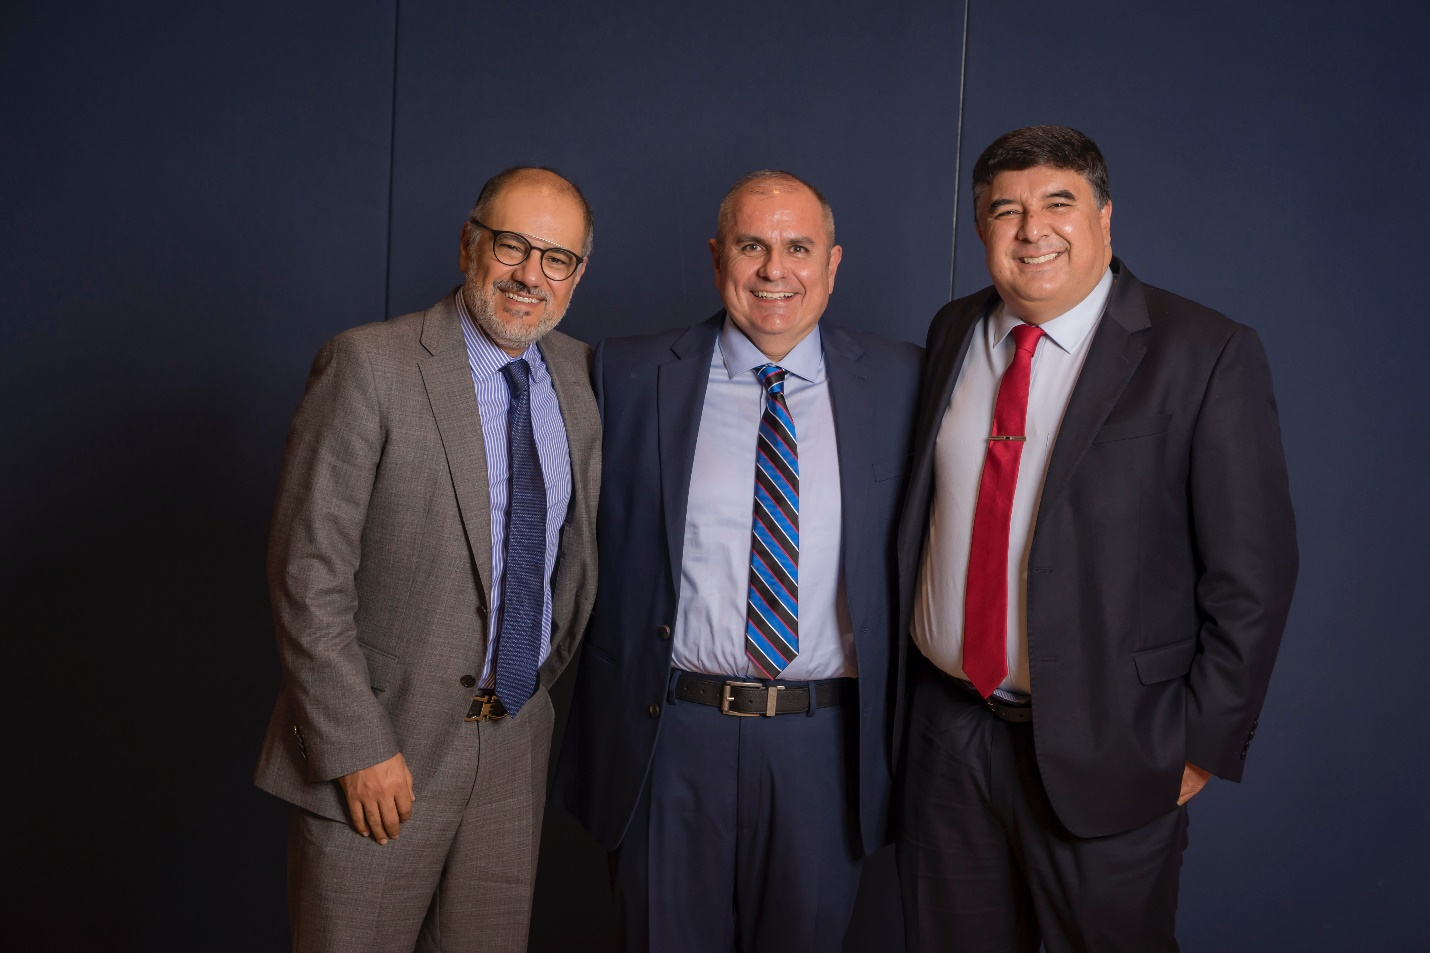 Three men in suits and ties smile for a group photo